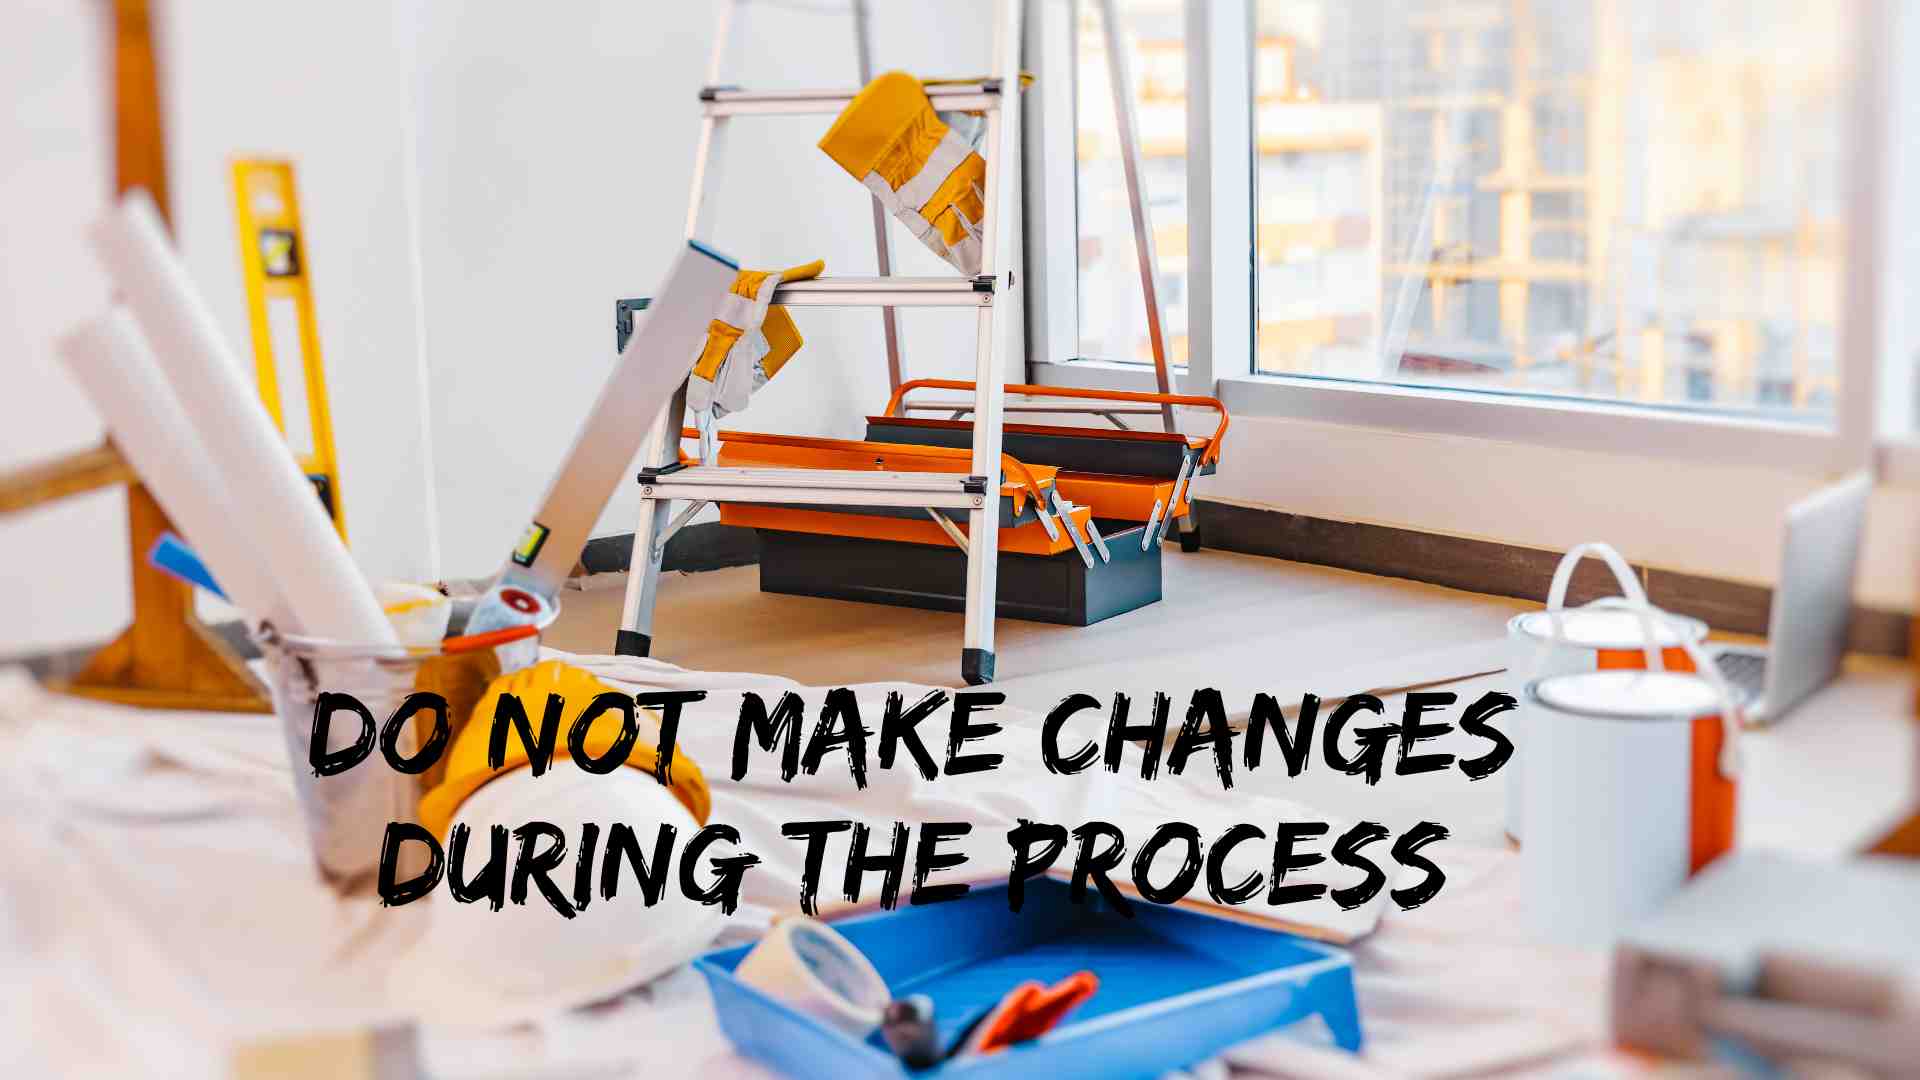 Do not make changes during the process